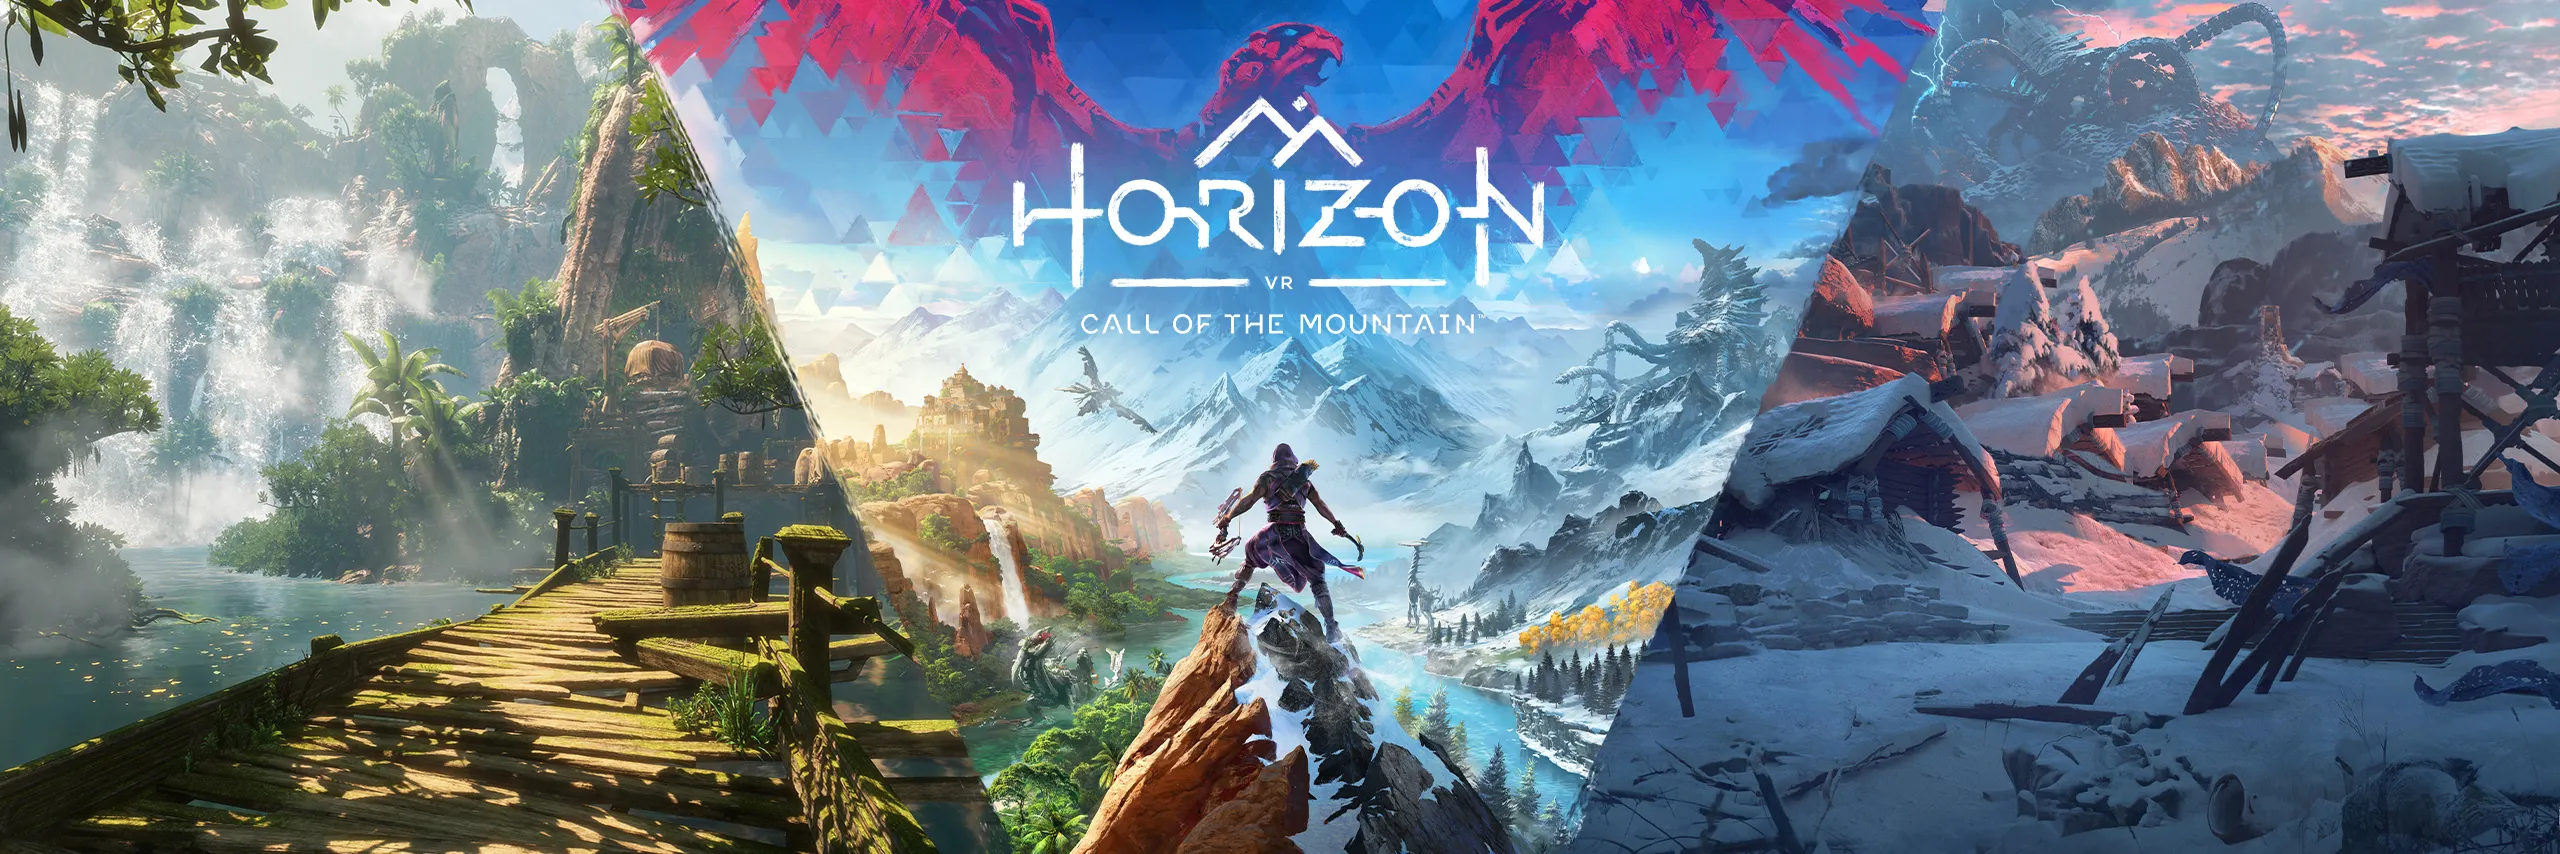 Horizon Call of the Mountain confirmed as PlayStation VR2 launch